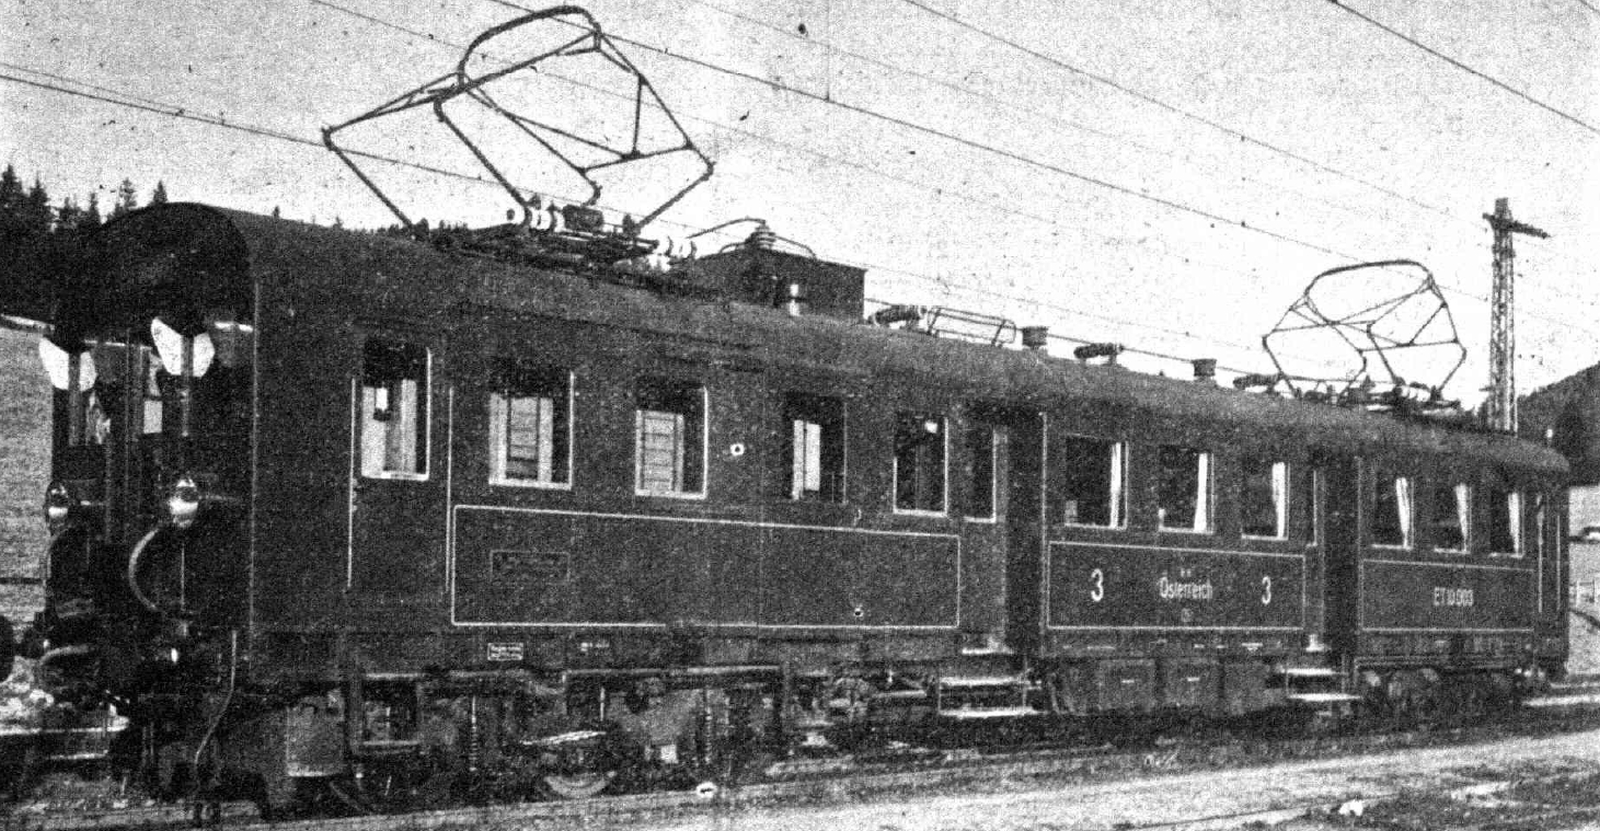 Original state with six axles